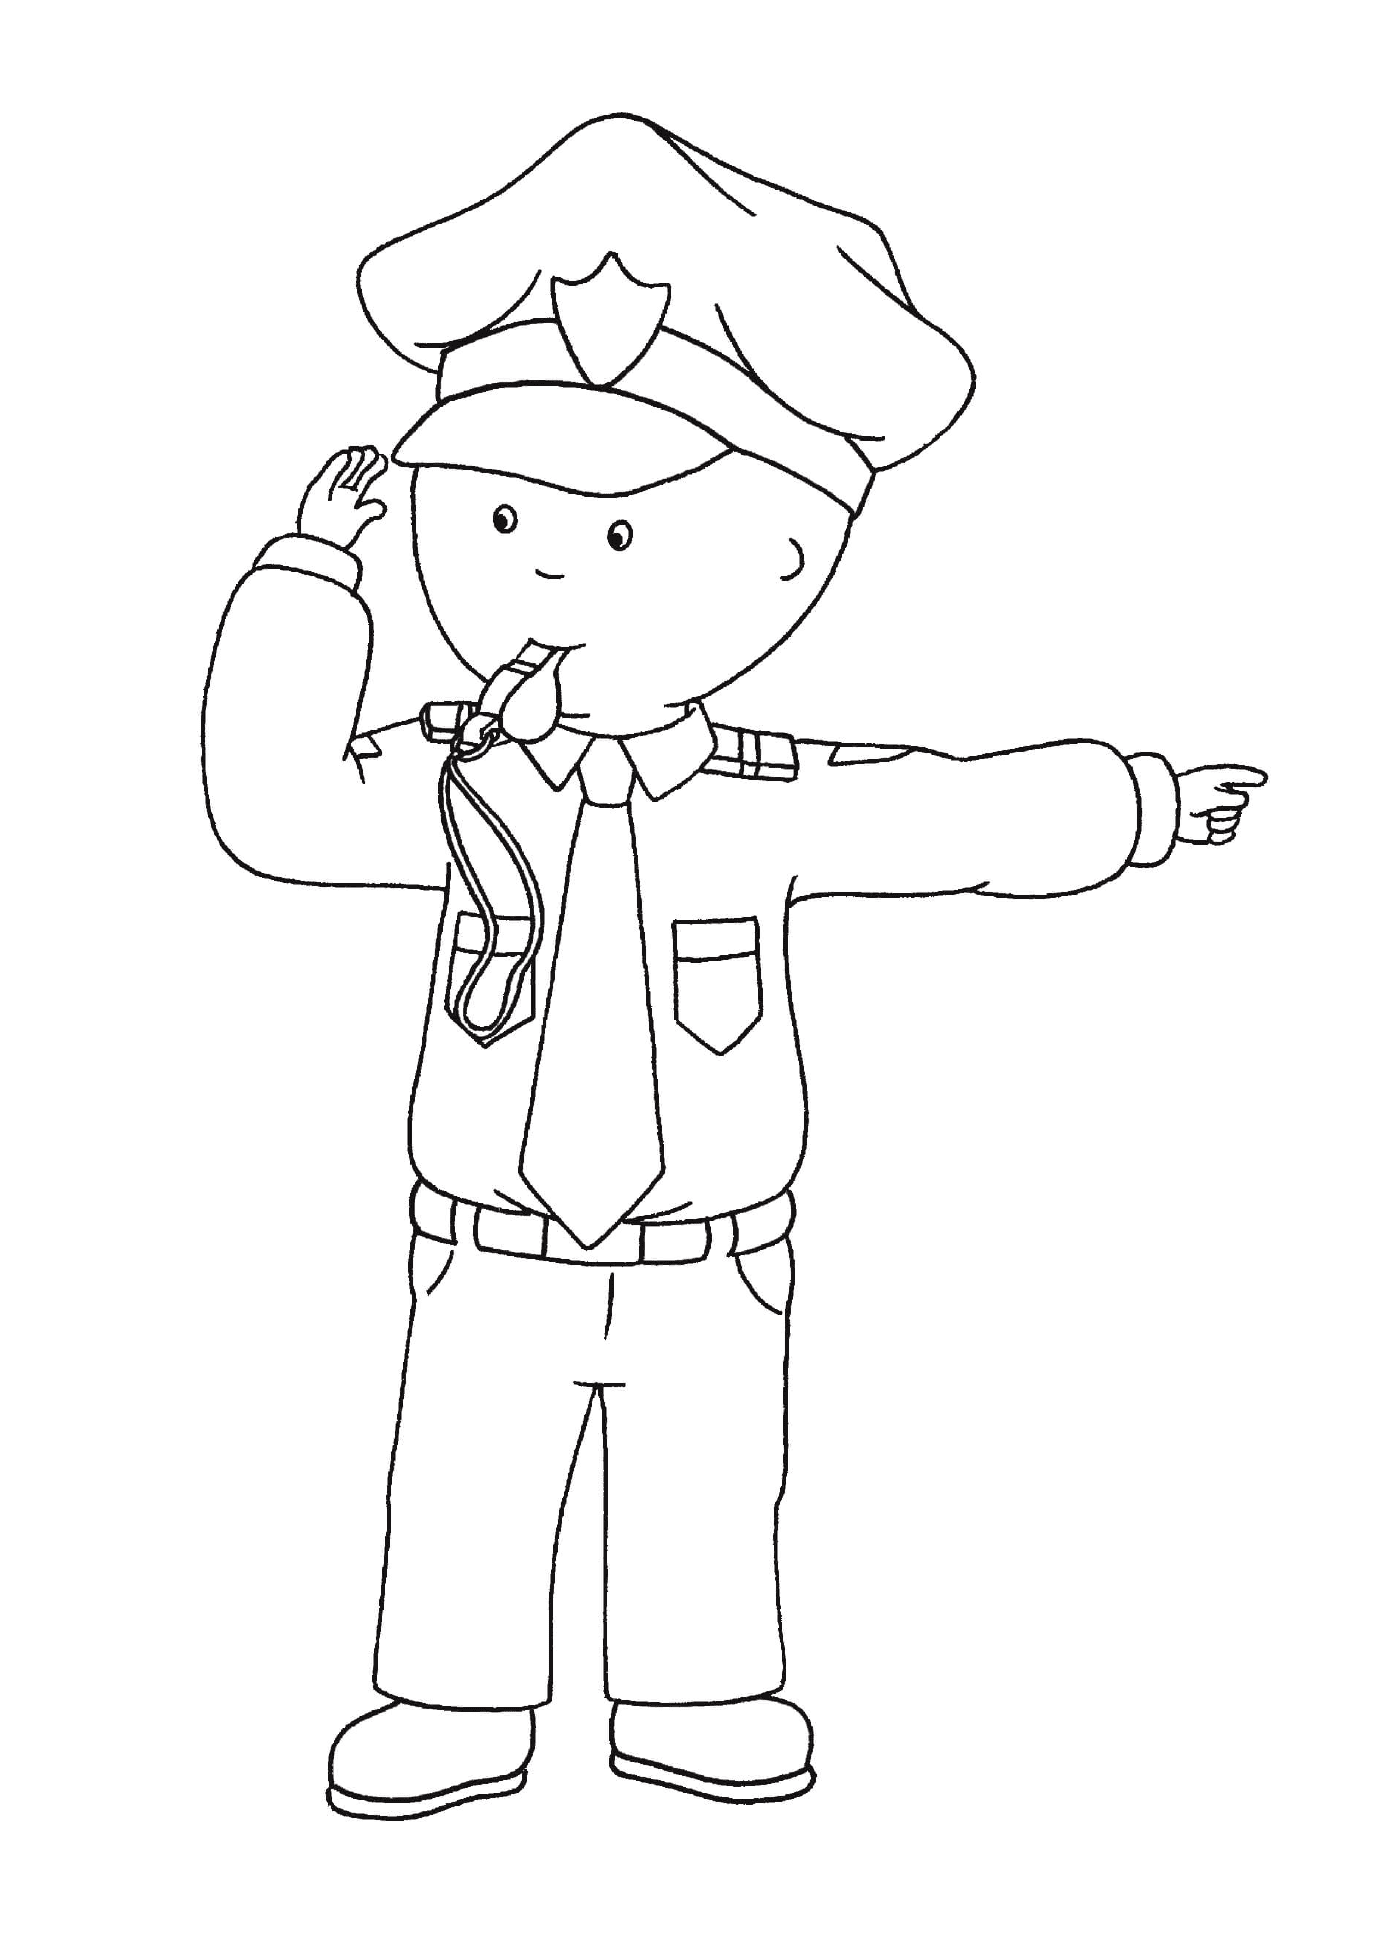  Caillou in a police suit for Halloween 